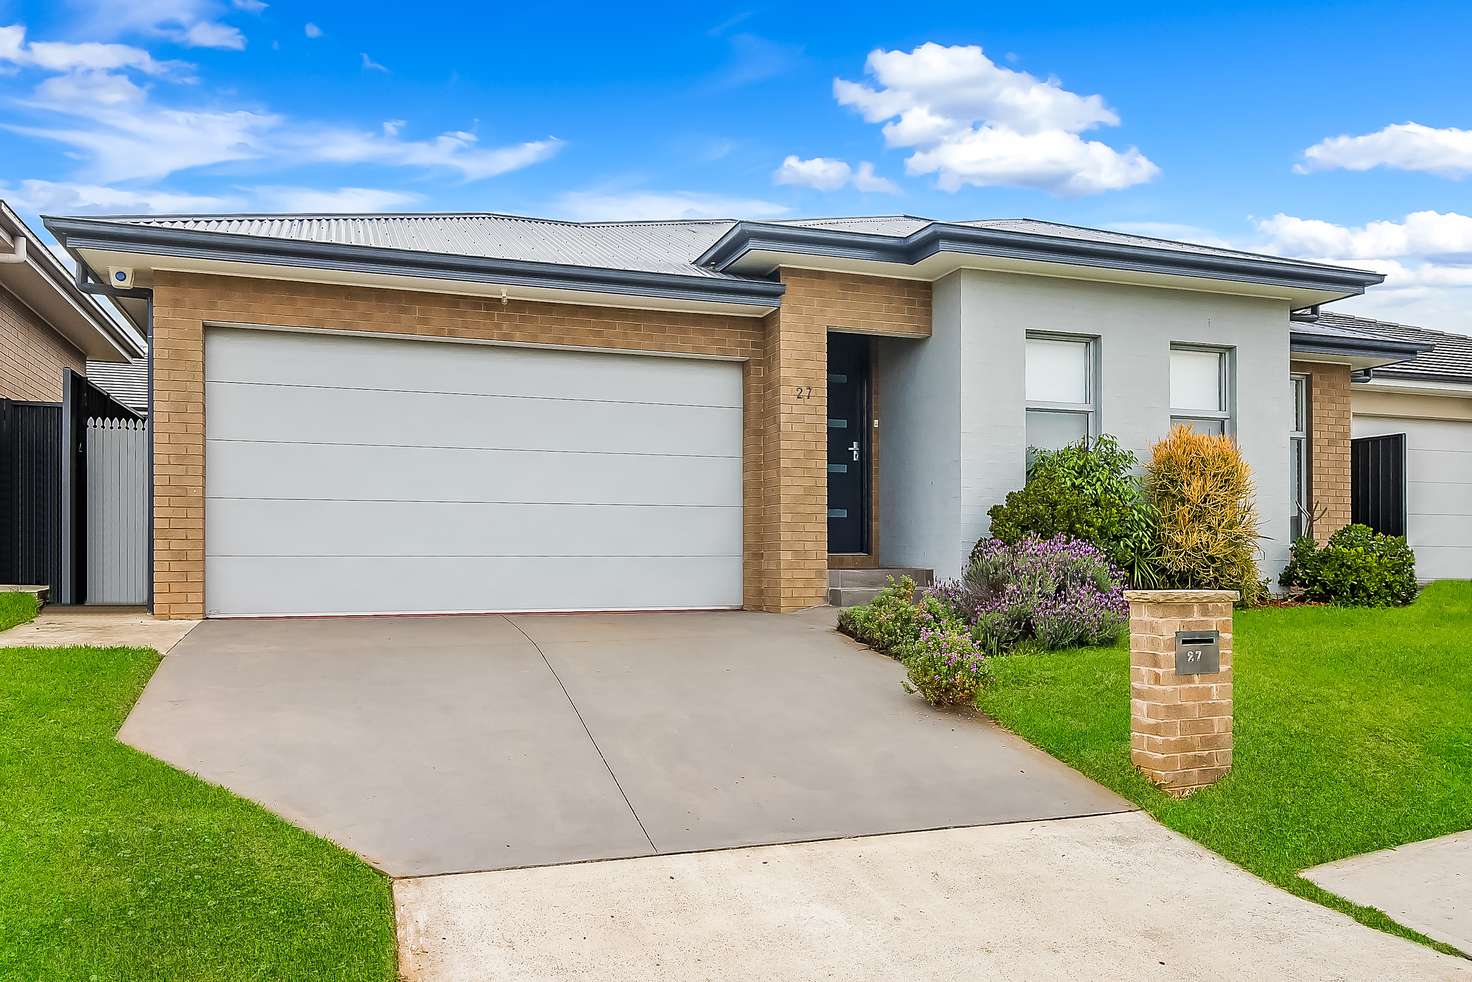 Main view of Homely house listing, 27 Piccadilly street, Riverstone NSW 2765